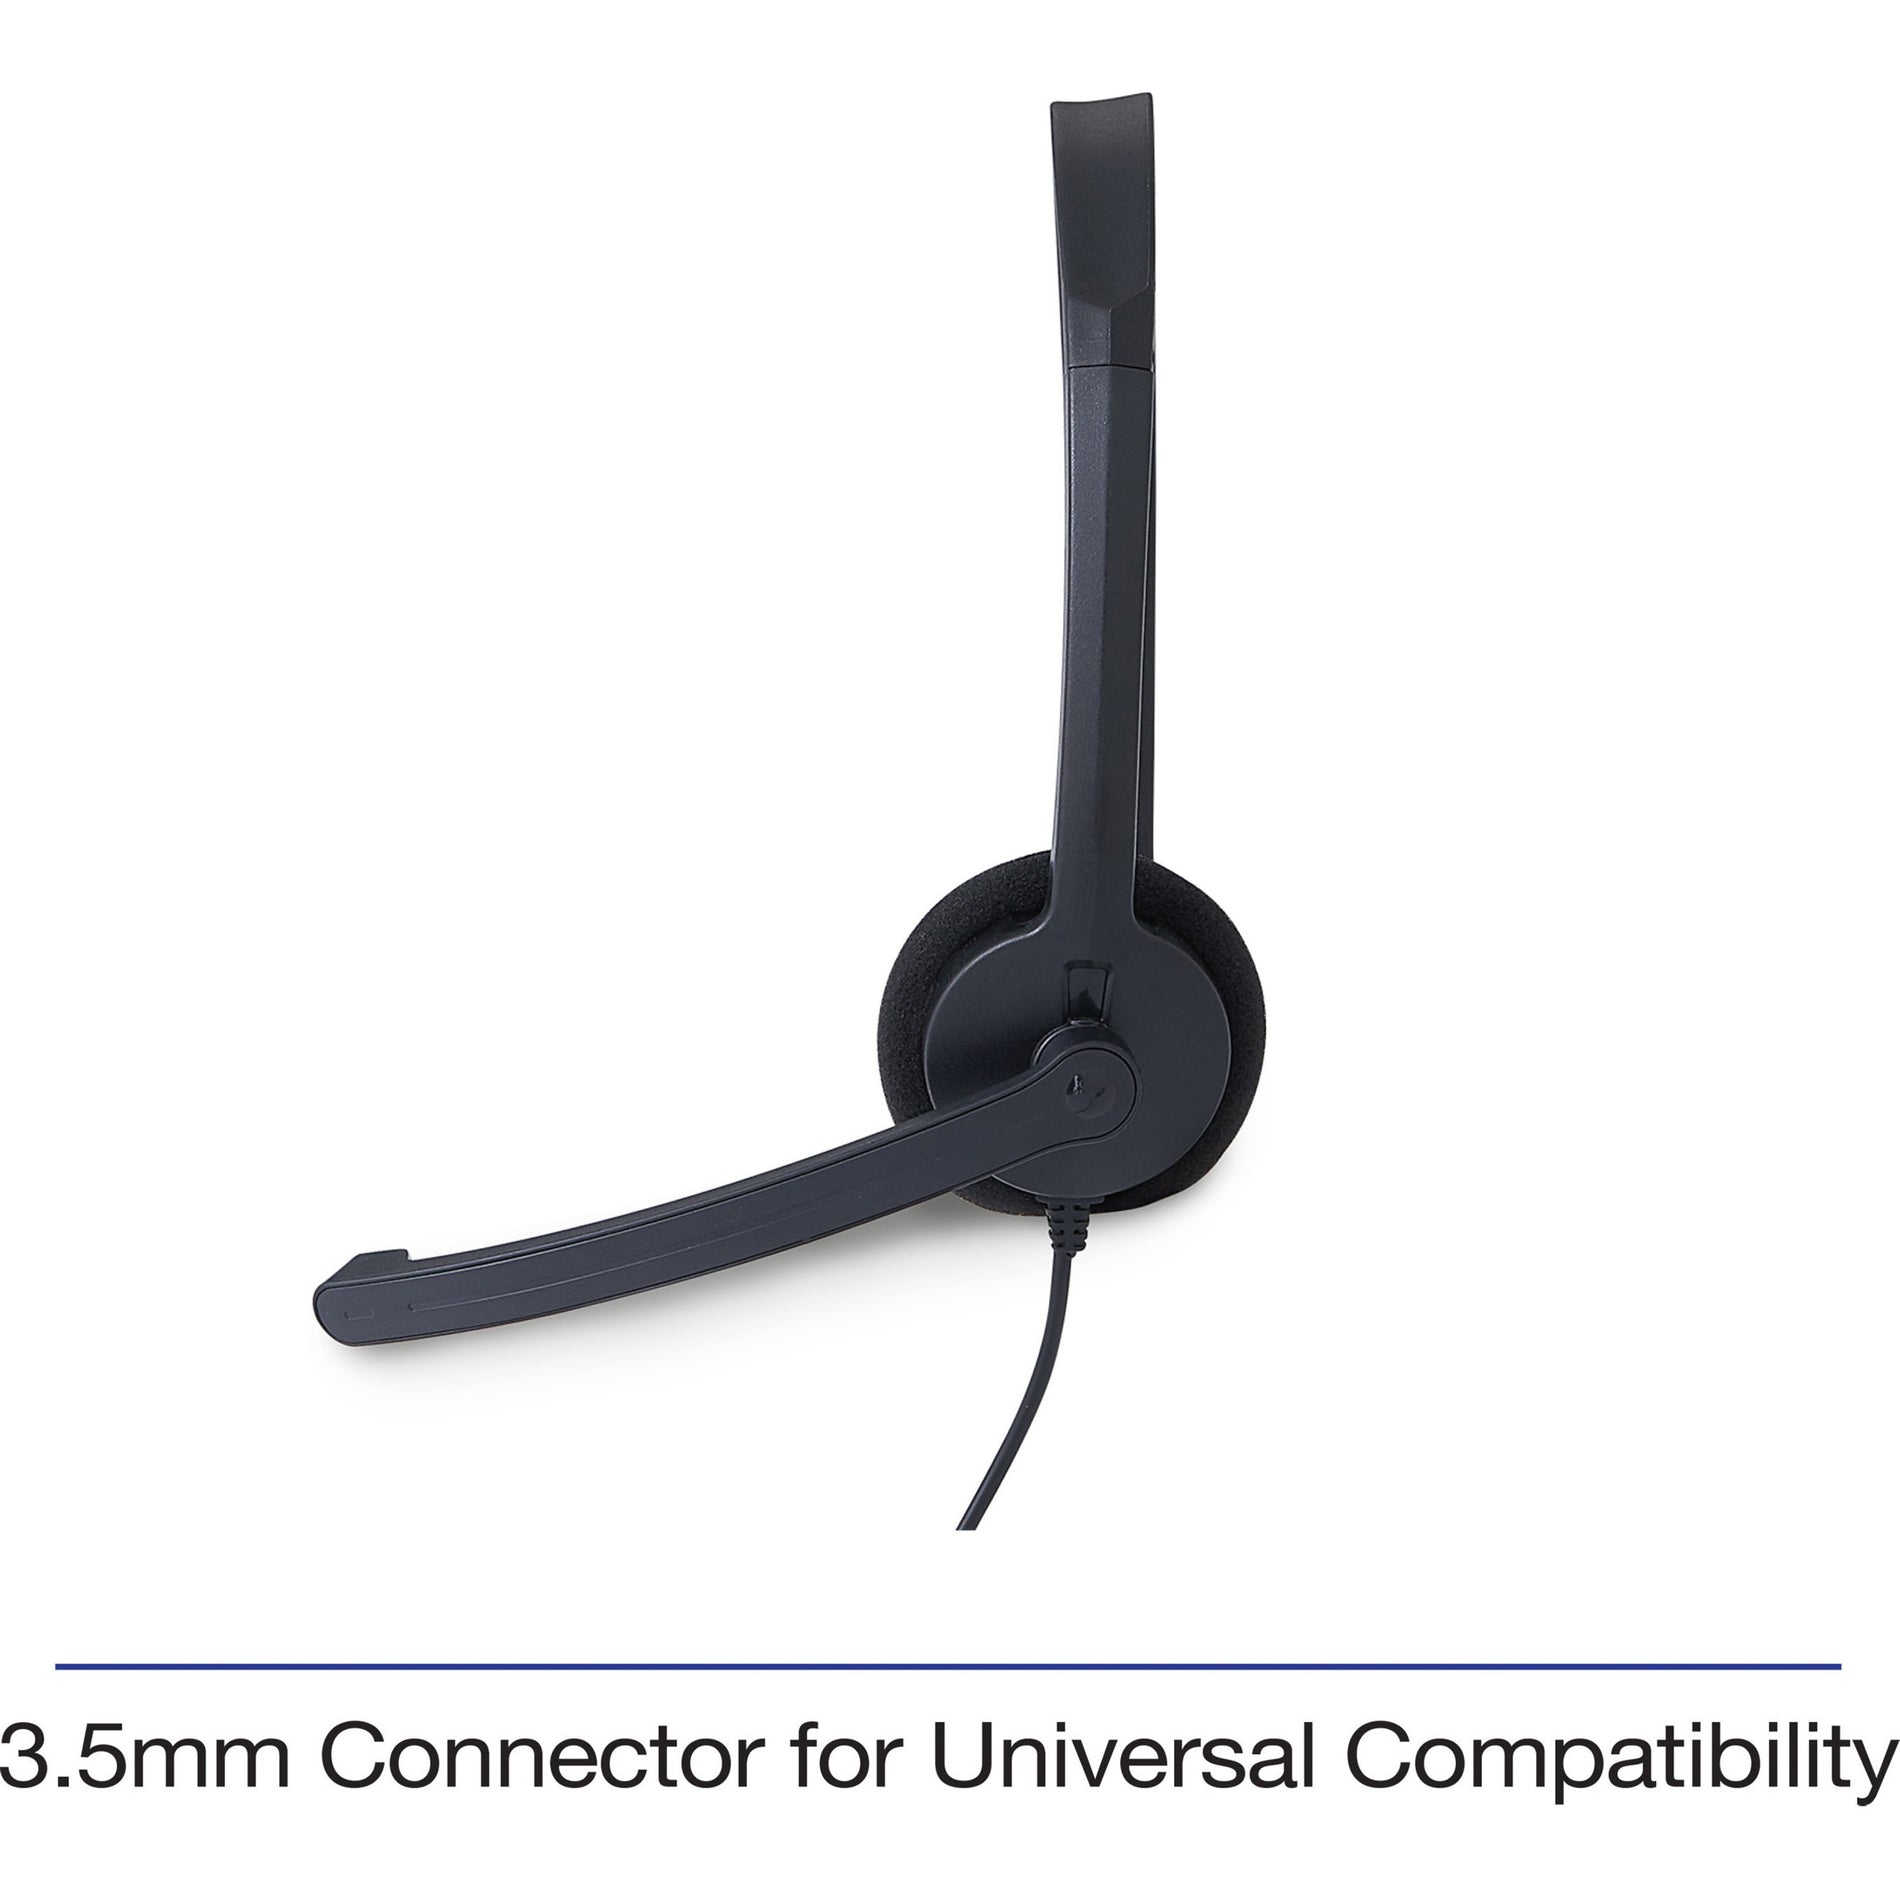 Verbatim 70722 Mono Headset with Microphone and In-Line Remote, Ergonomic Design, Rotating Microphone, Plug and Play